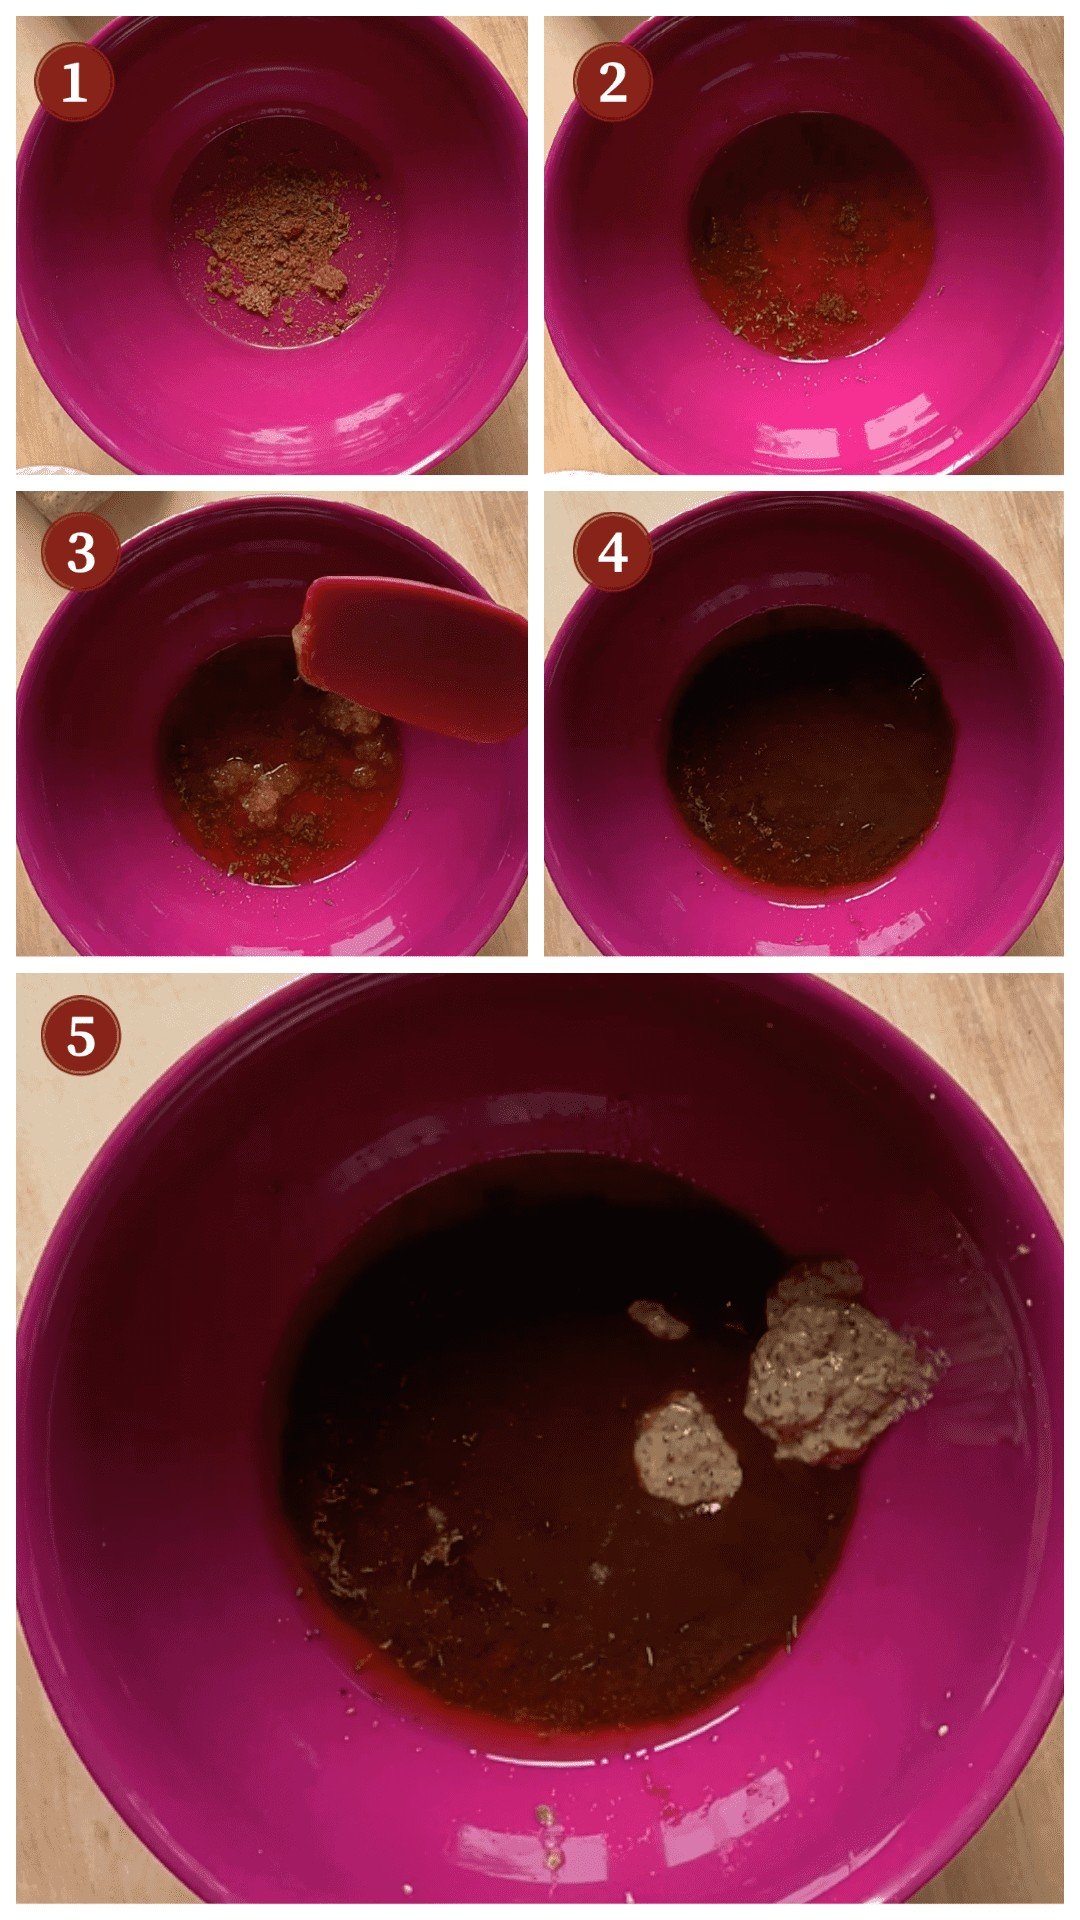 A collage of images showing how to make bourbon street steak, steps 1 - 5.